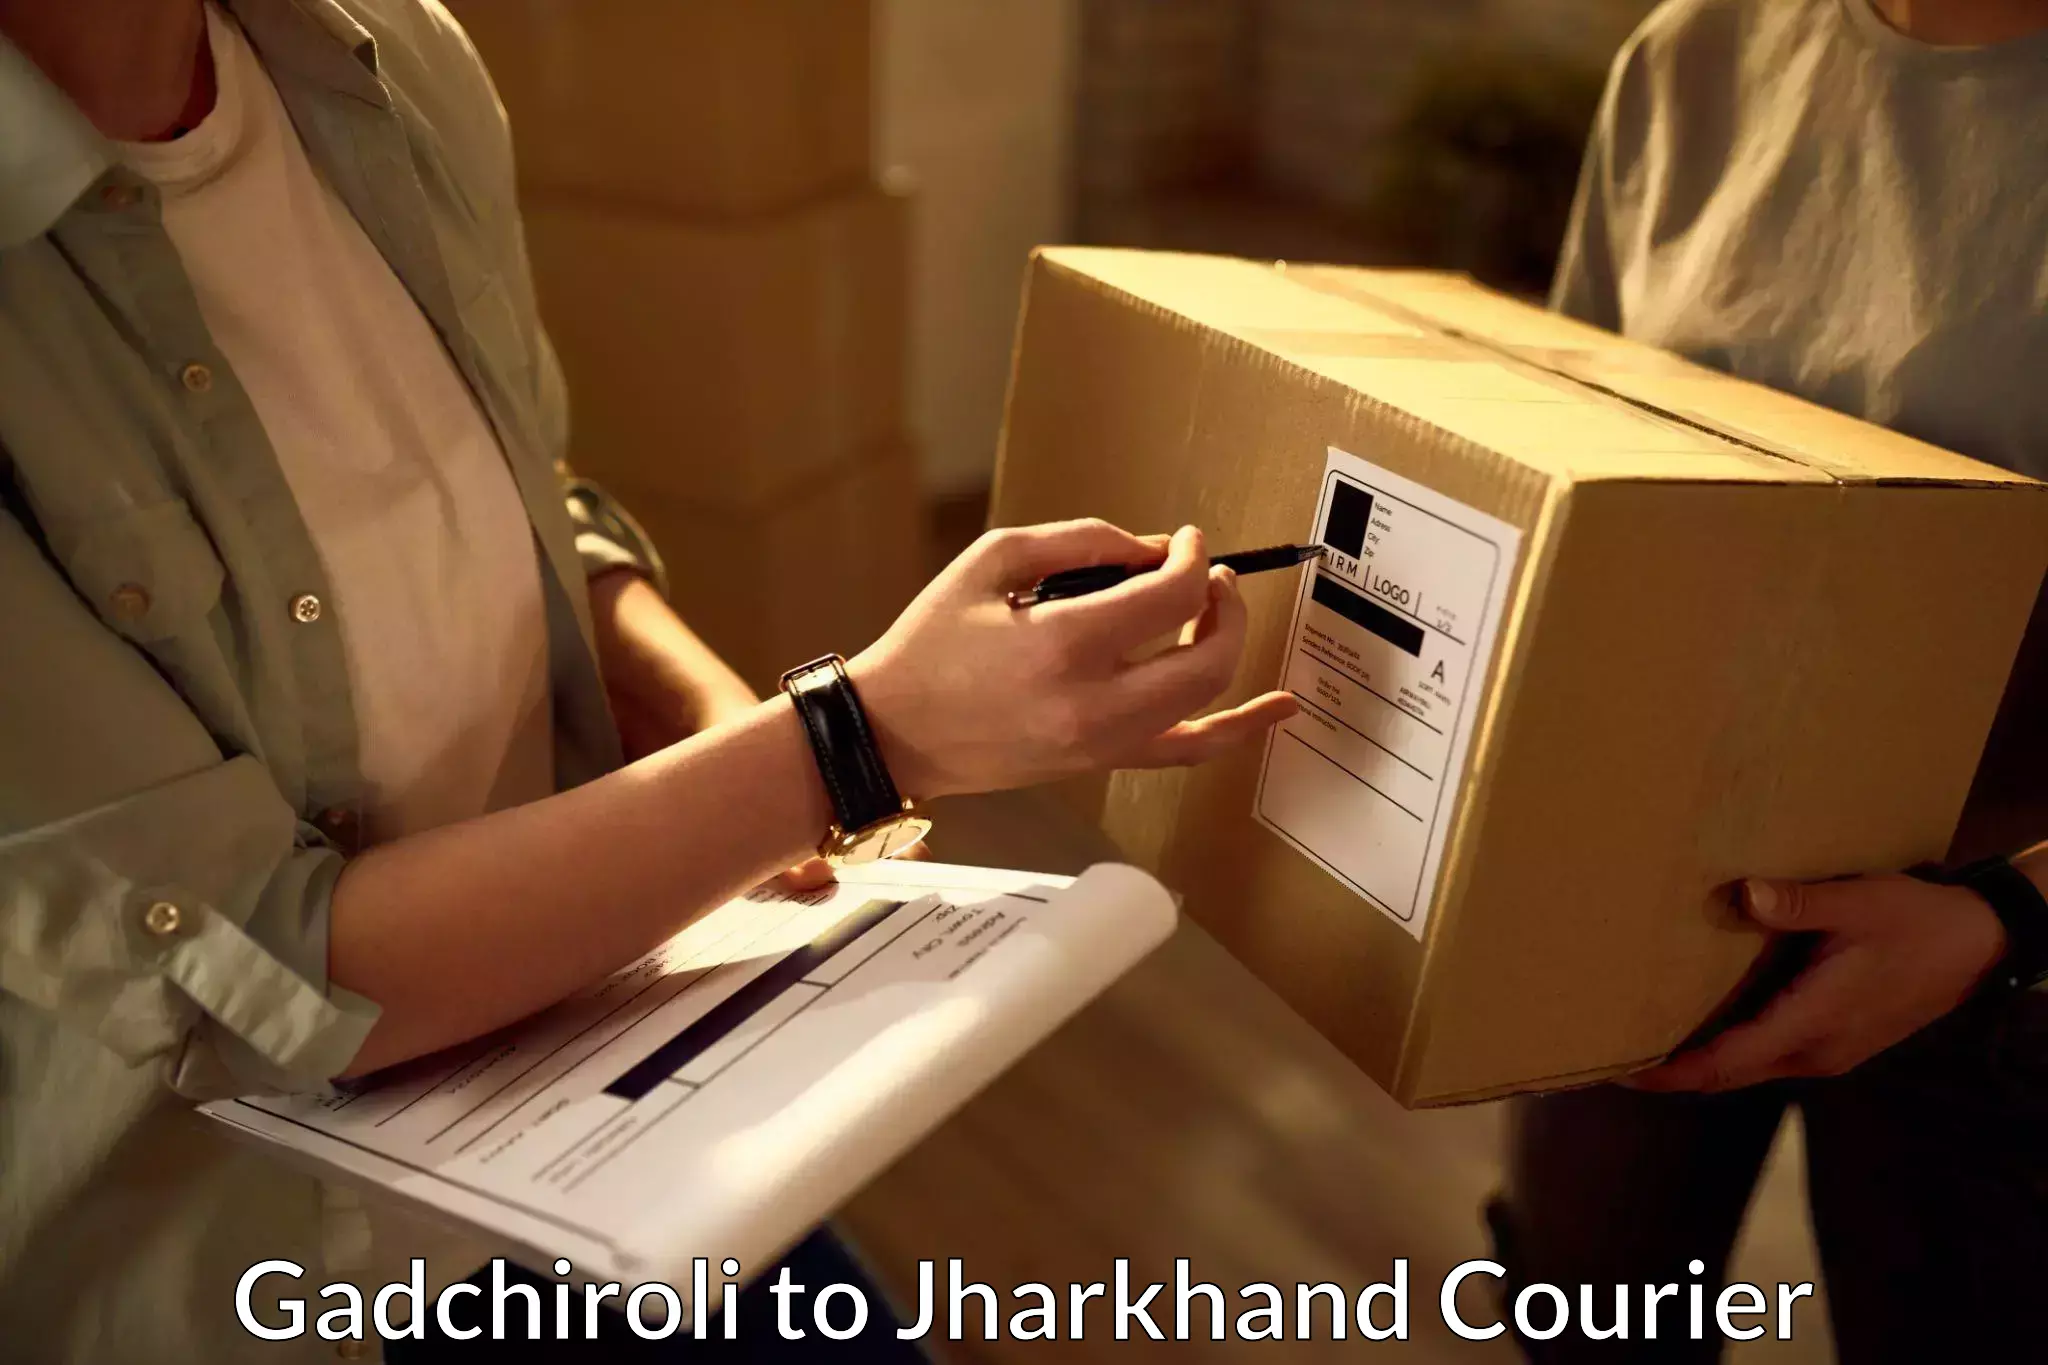 Affordable parcel service Gadchiroli to Jharkhand